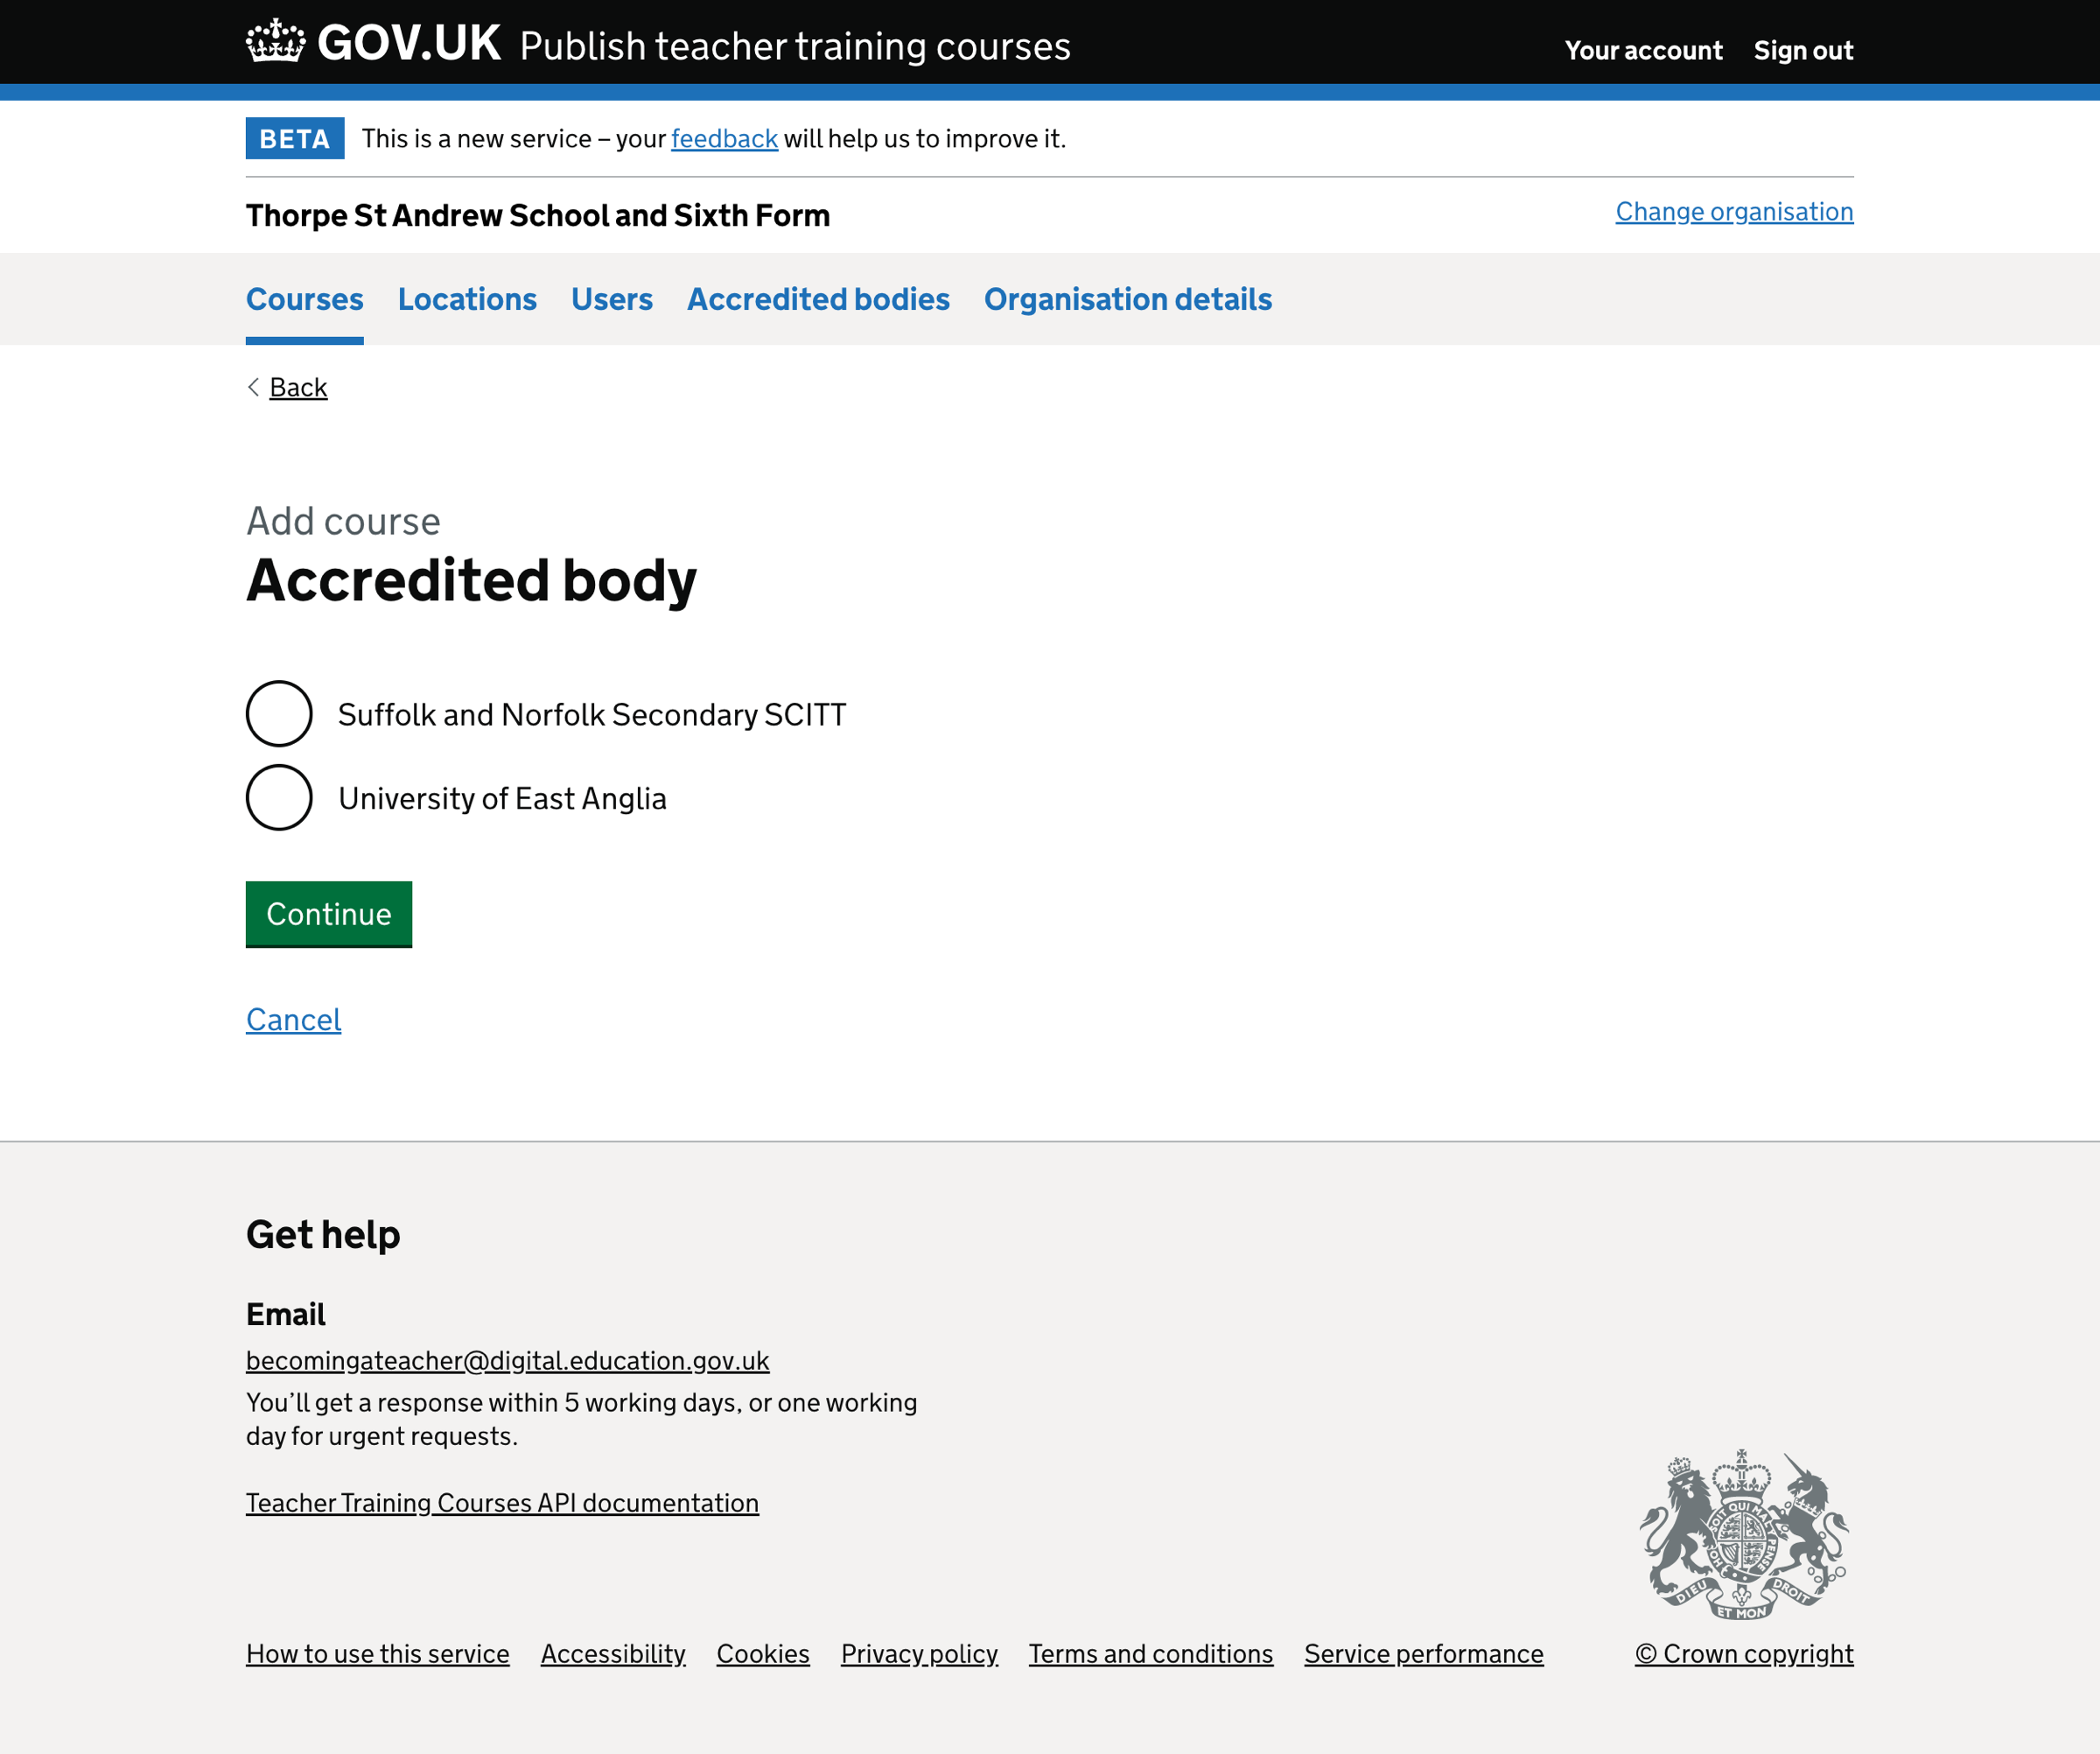 Screenshot of Add course - accredited body